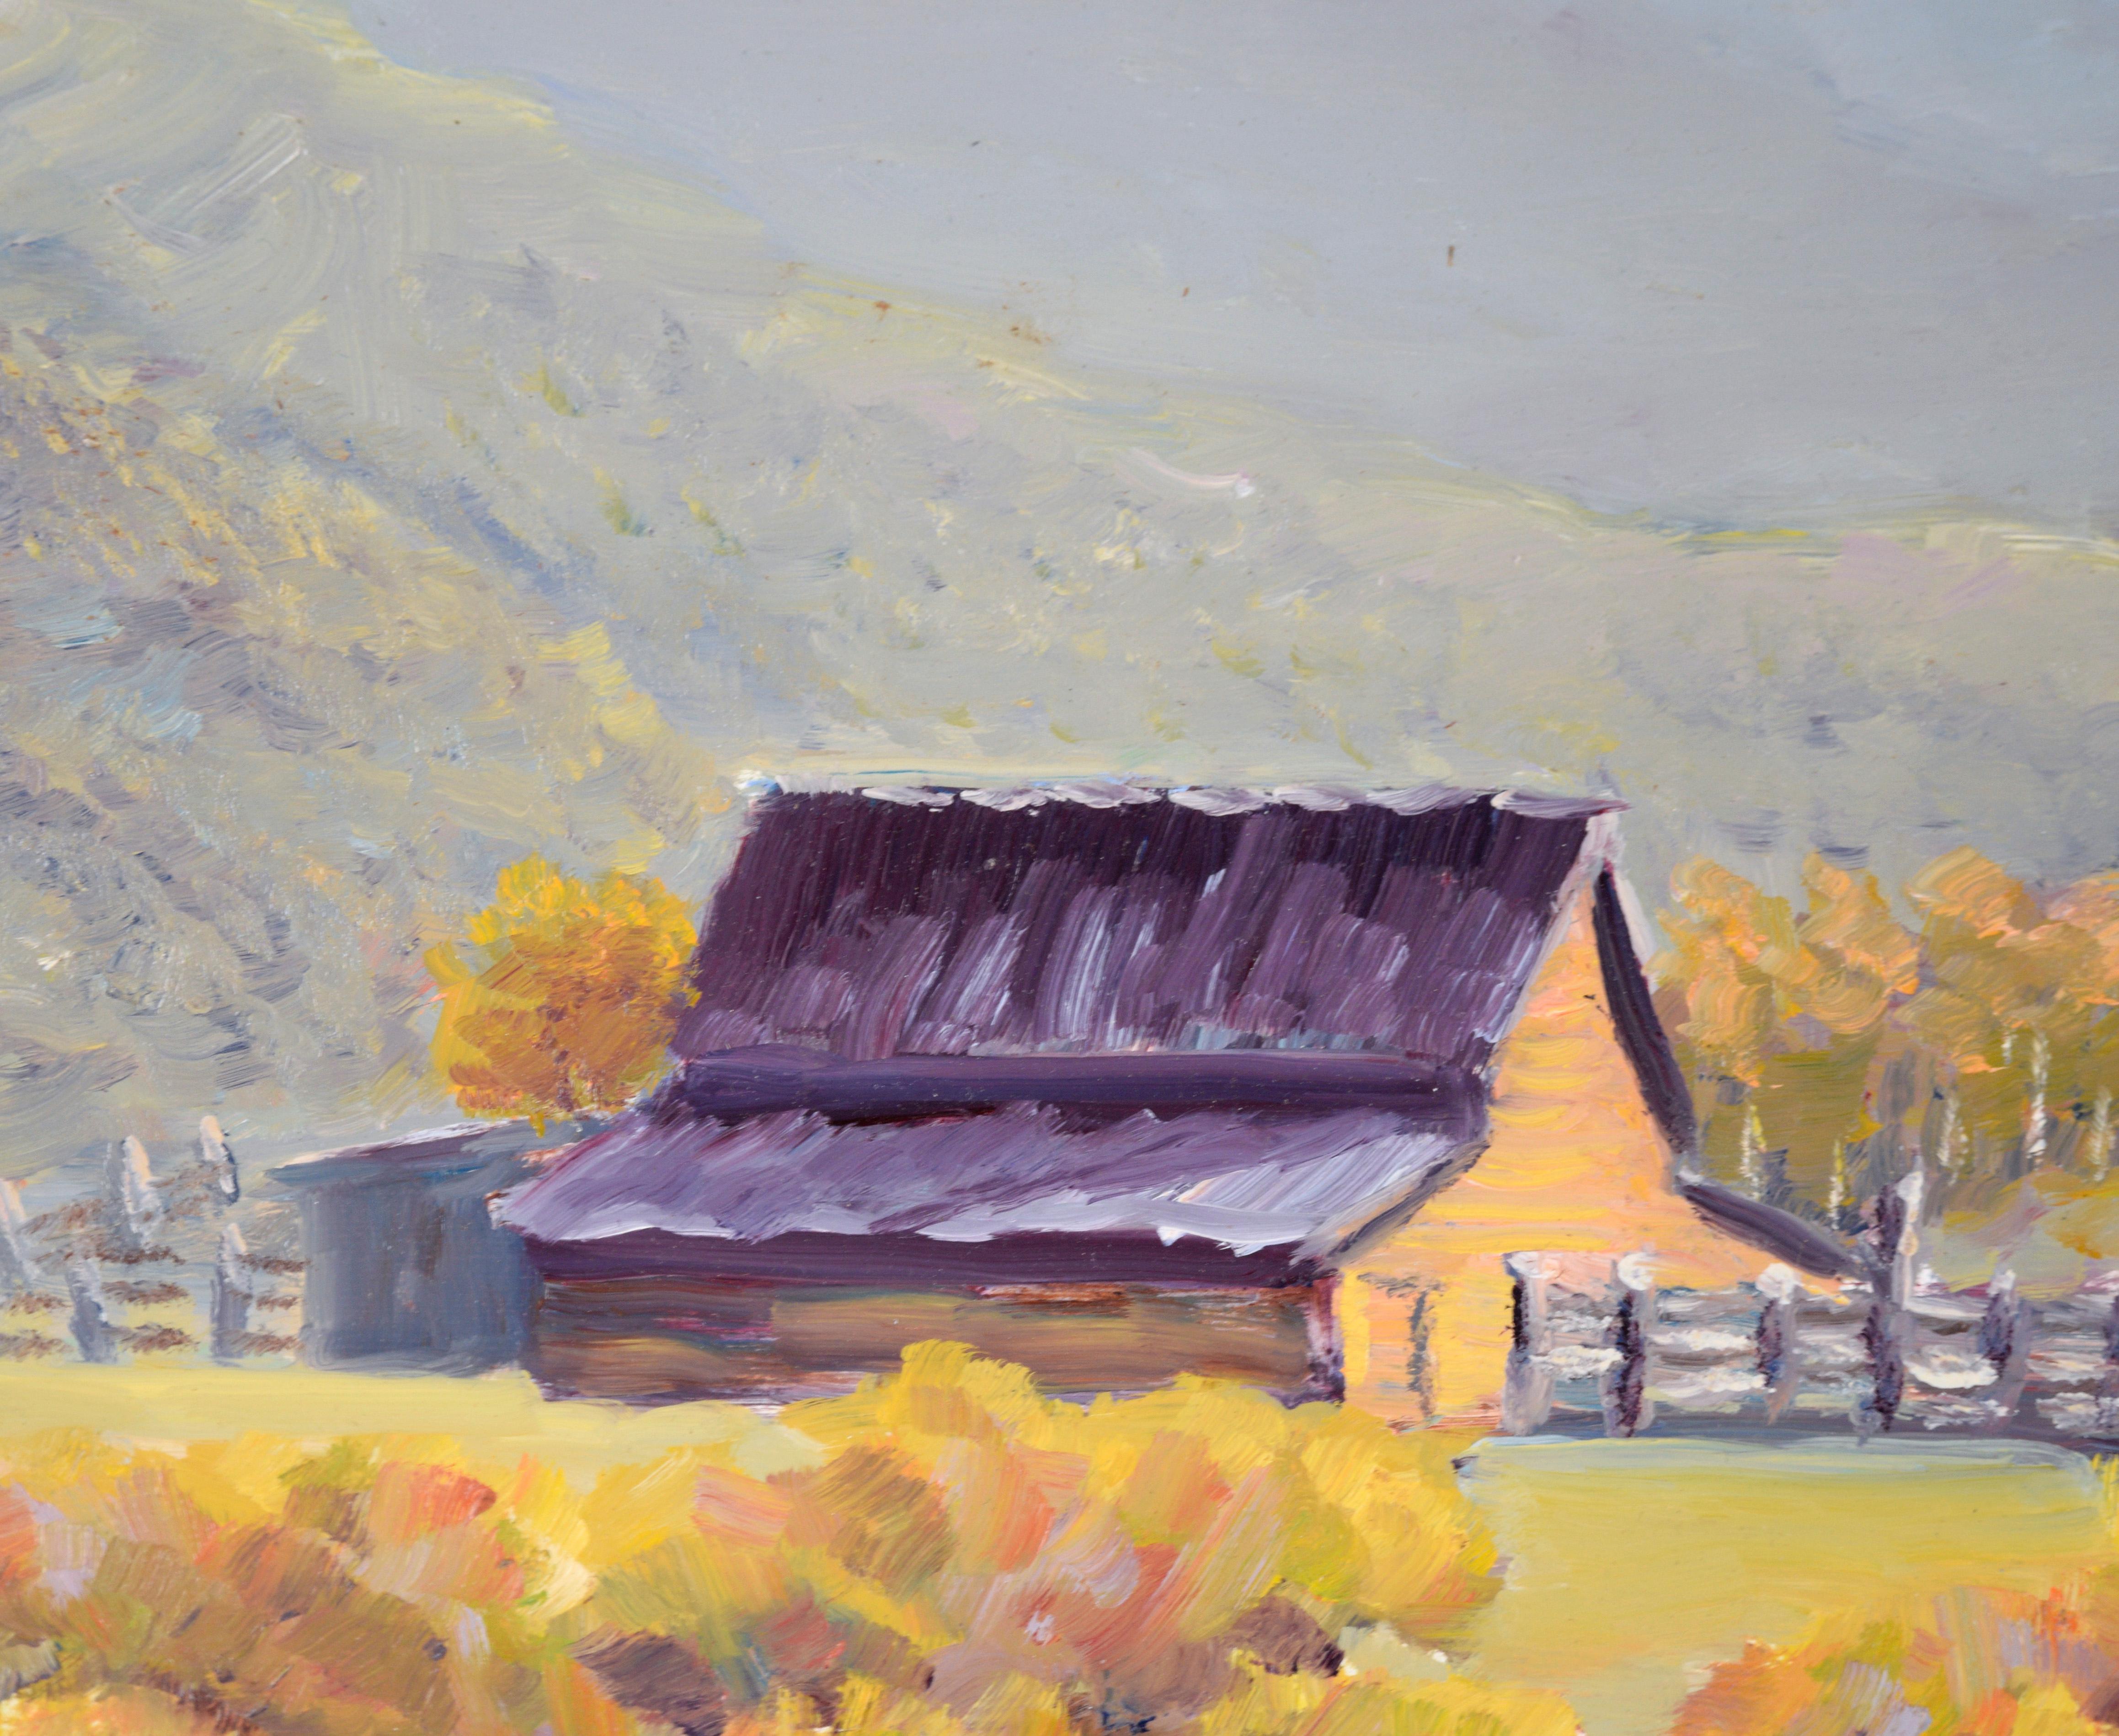 Wyoming Barn - Plein Aire Landscape in Oil on Masonite - Painting by Nick White